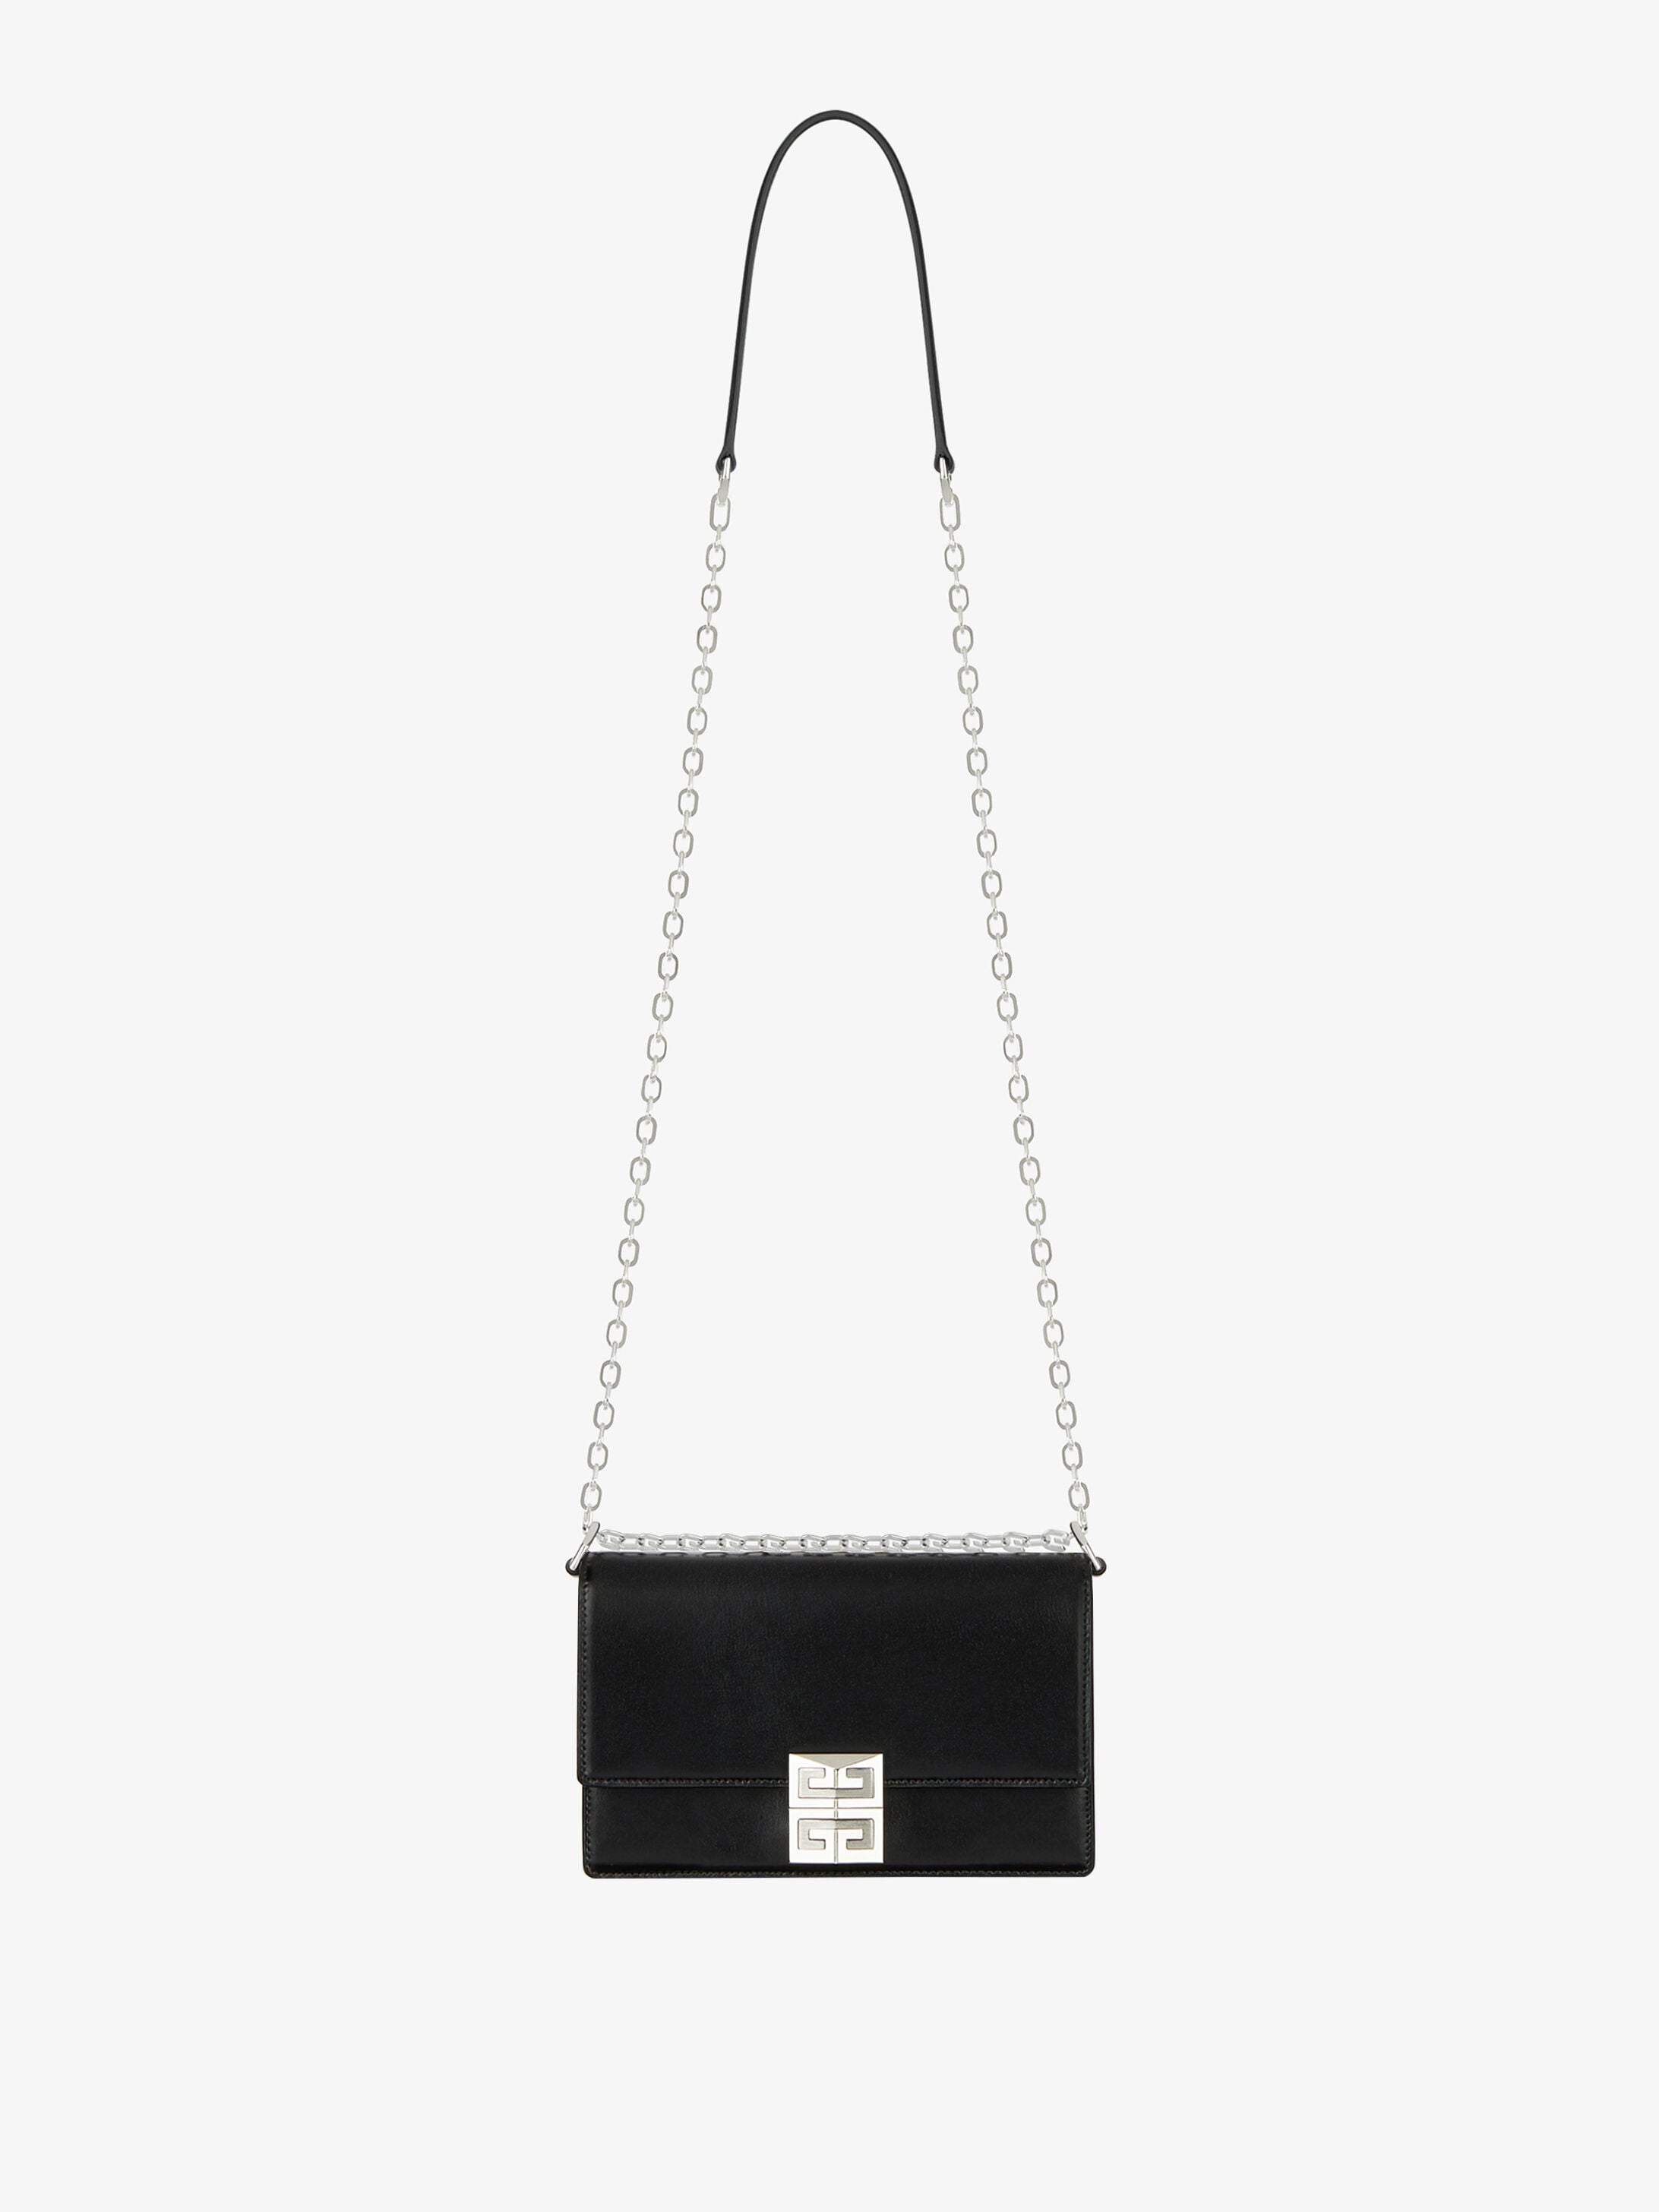 Bags Givenchy for Women | GIVENCHY Paris | GIVENCHY Paris